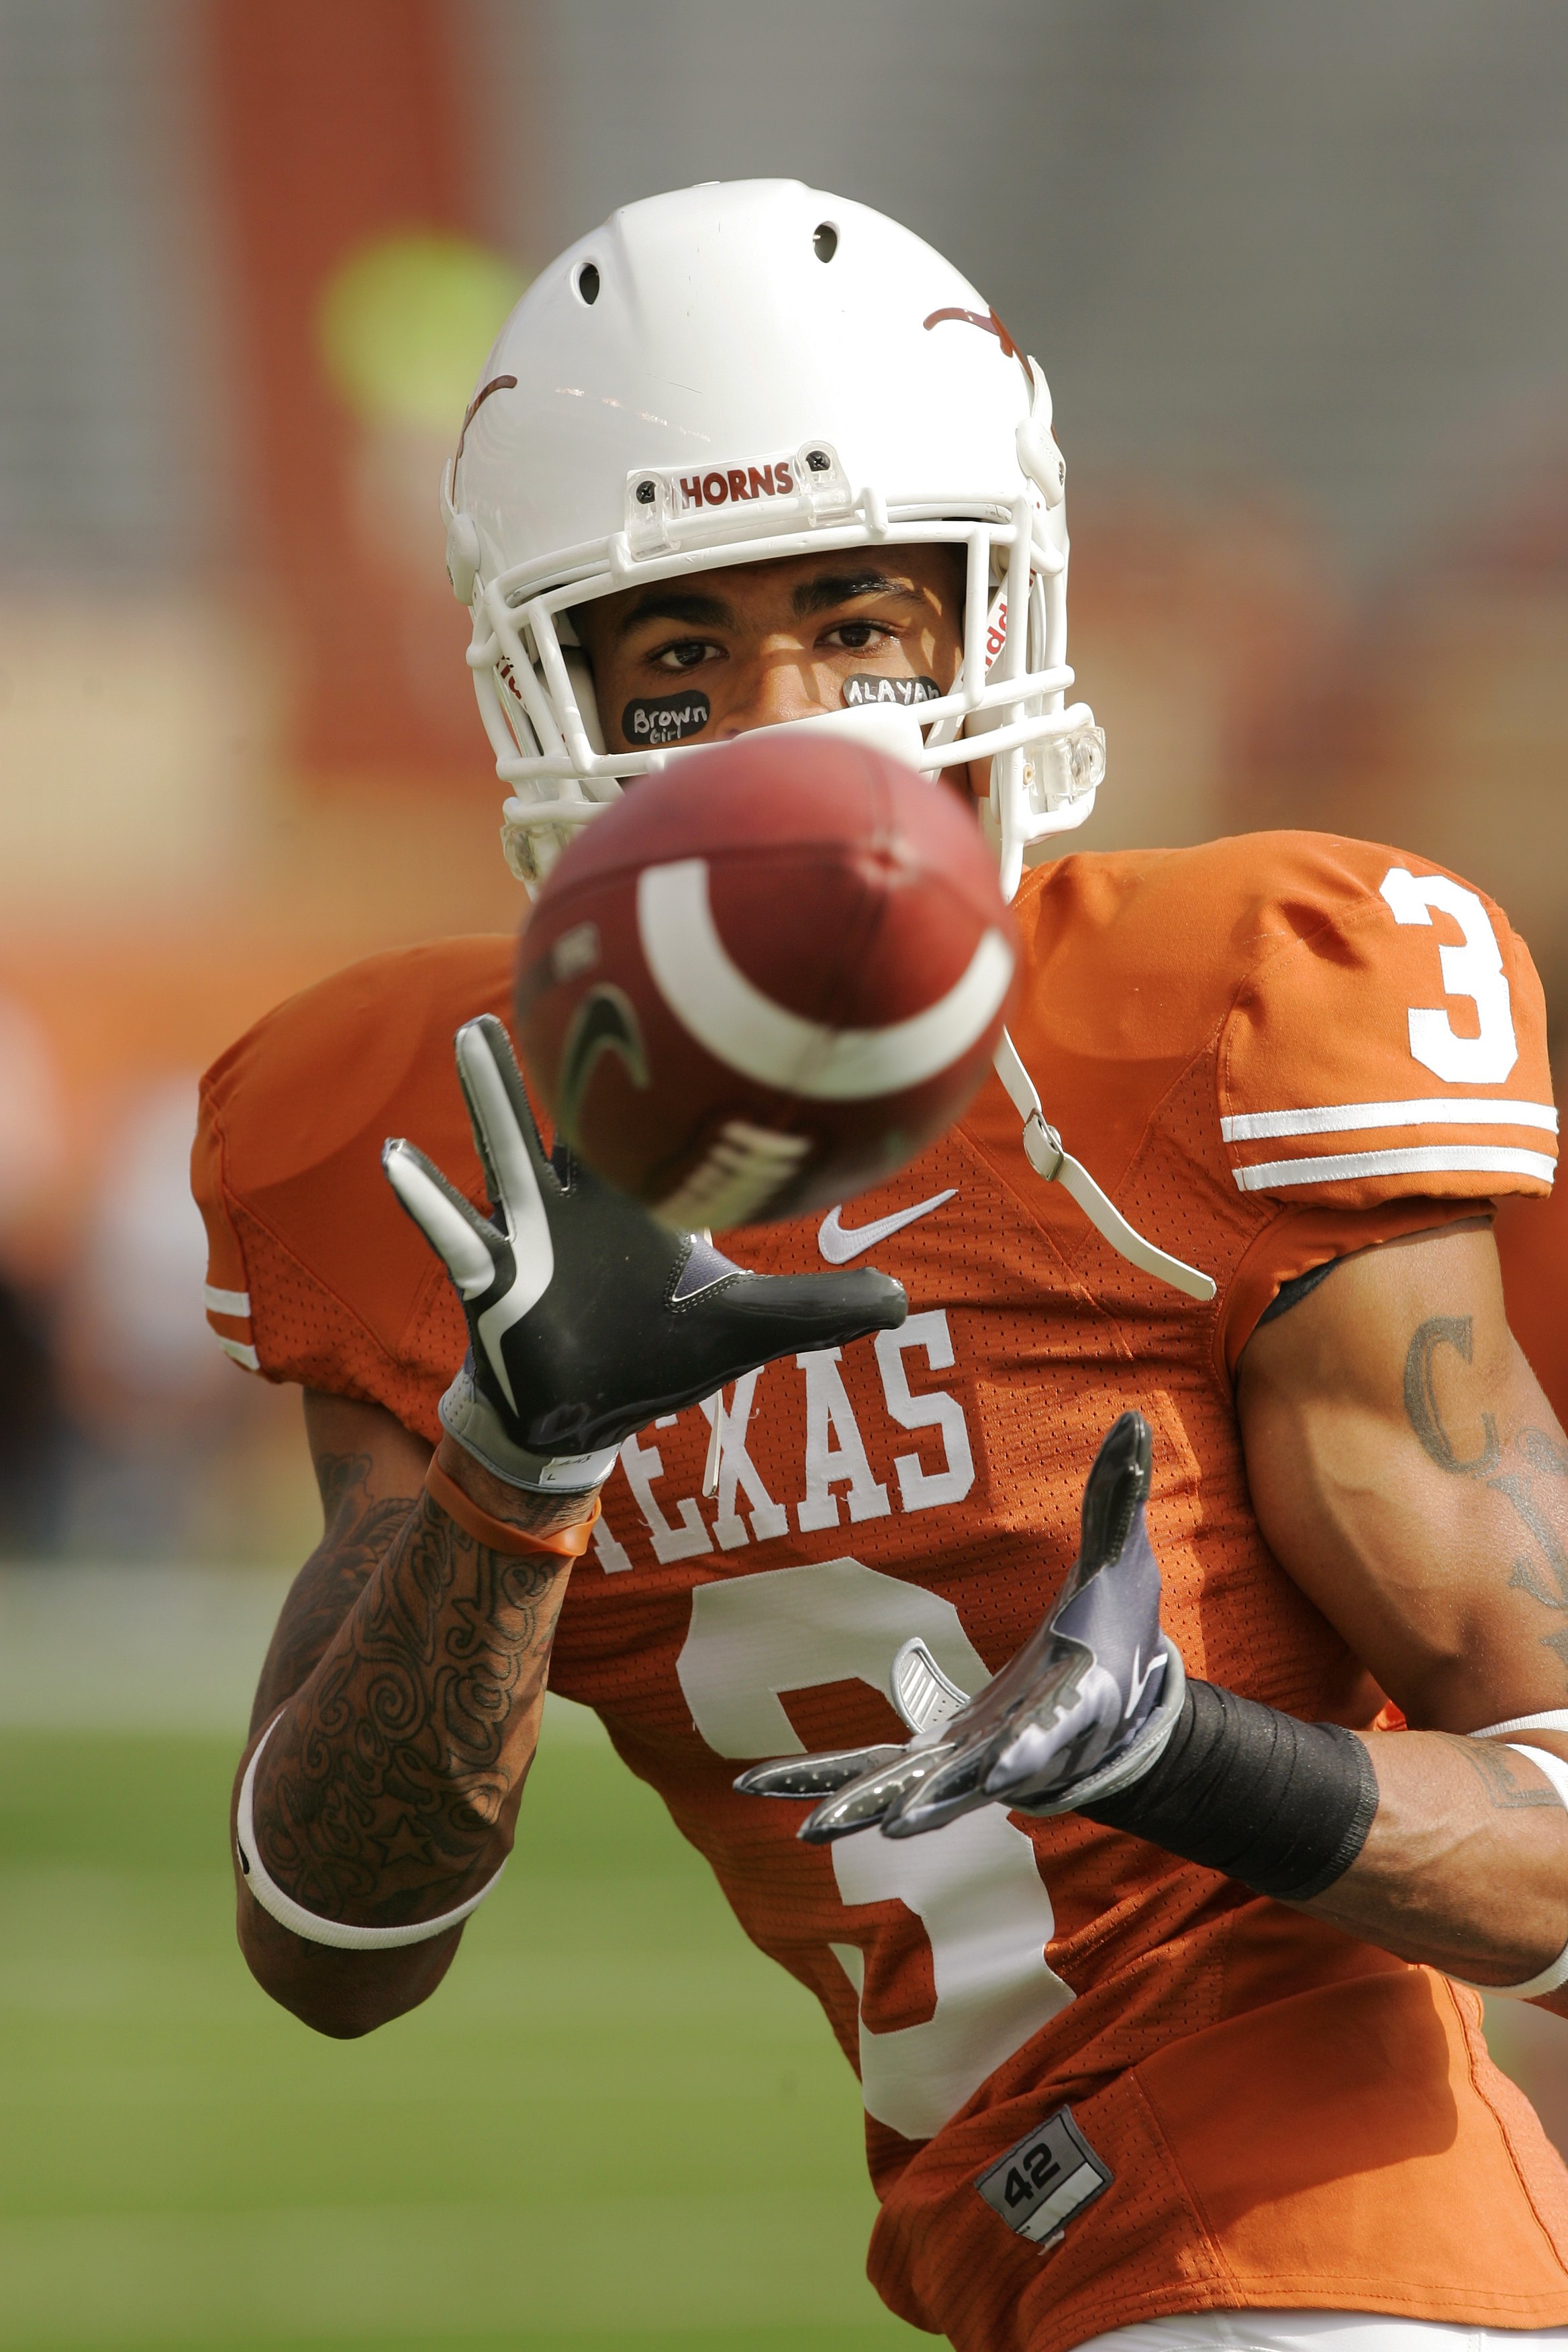 Nov. 20, 2010 - Austin, Texas, United States of America - Texas Longhorns  cornerback Curtis Brown (3) stretches before the game between the  University of Texas and Florida Atlantic University. The Longhorns